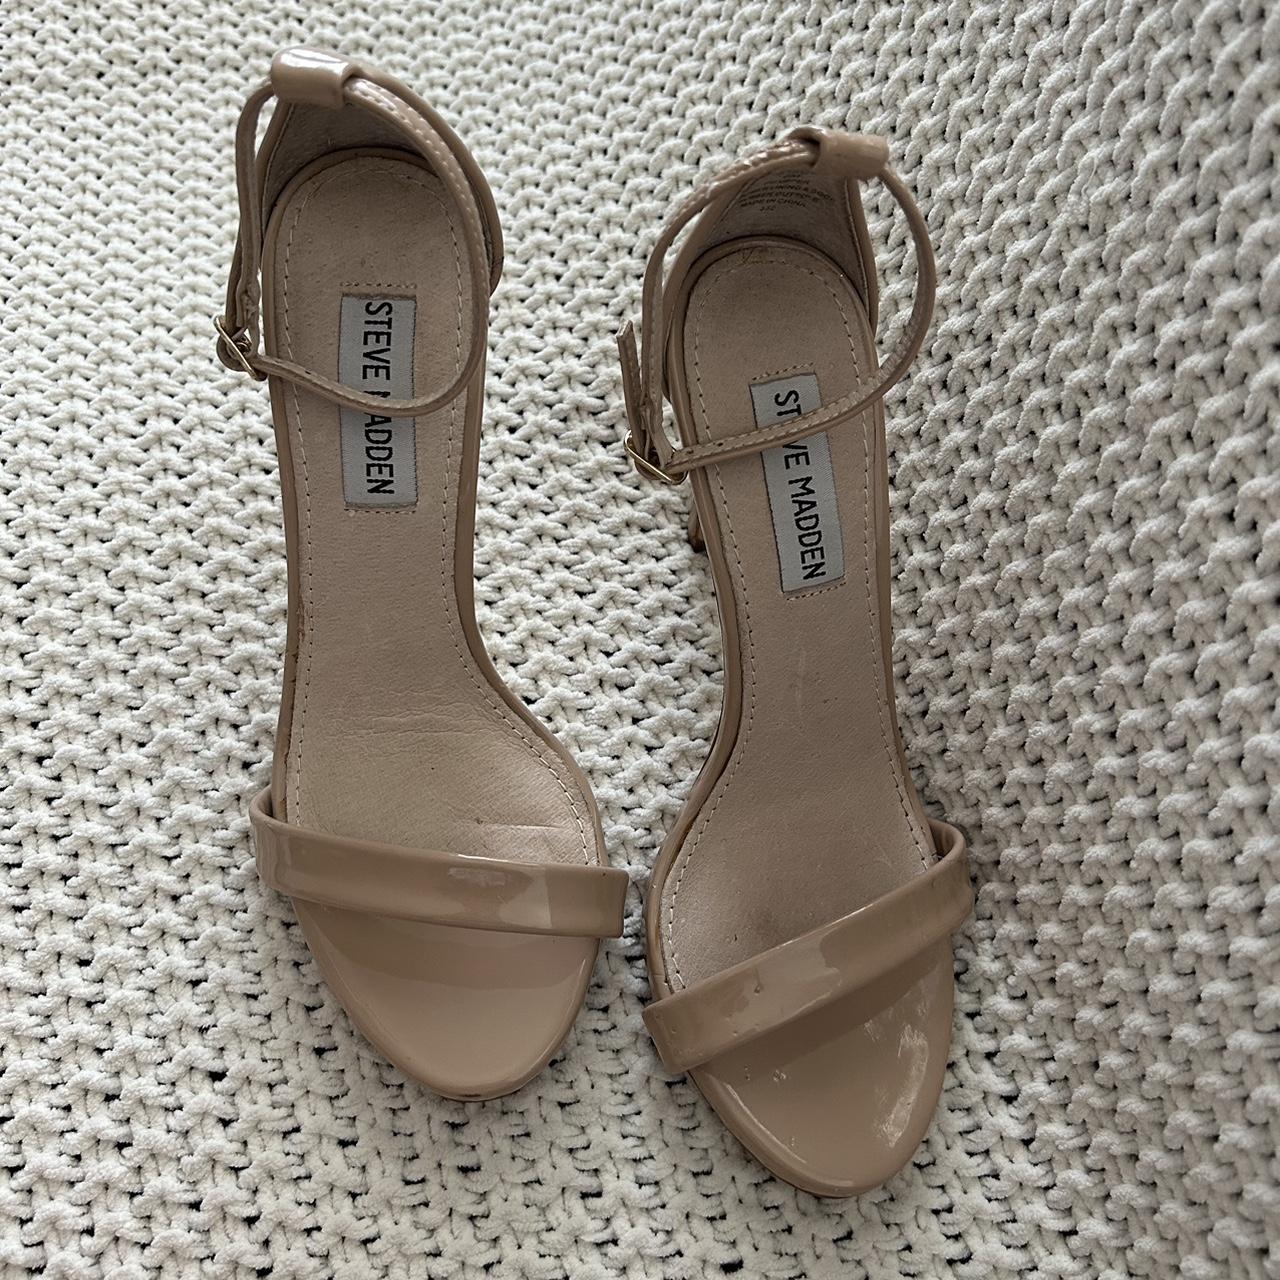 Nude Steve Madden strappy pumps 👡🤎 - worn and with... - Depop